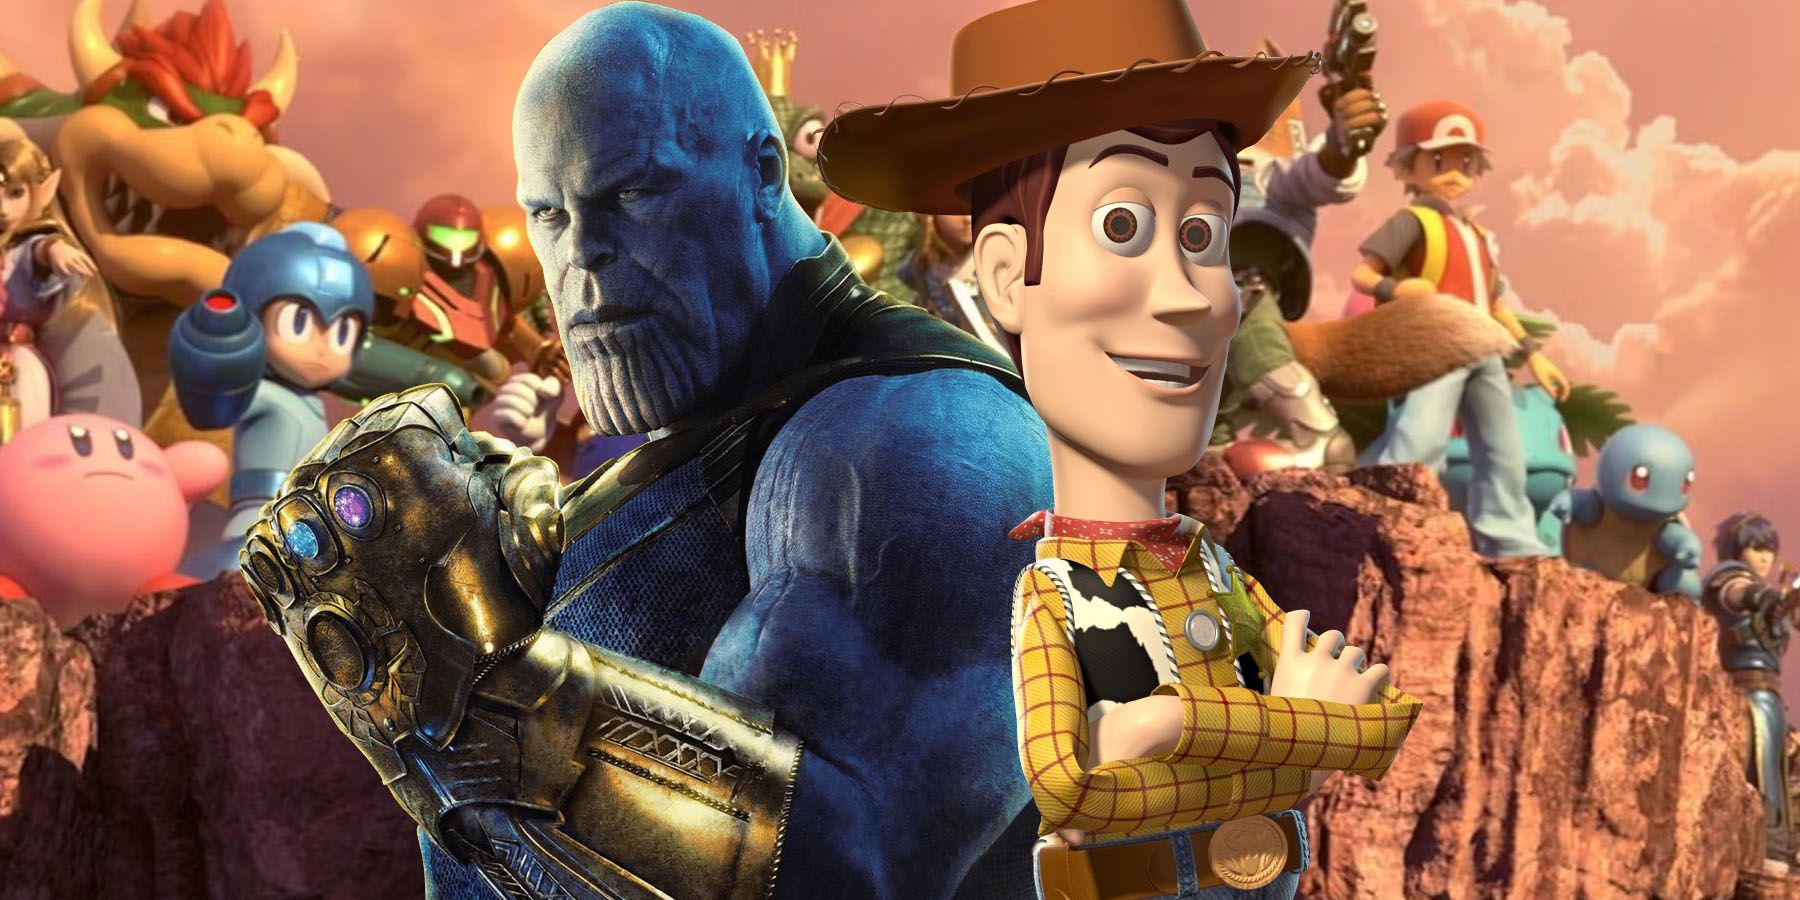 Images of Thanos and Woody standing in front of the cast of Super Smash Bros.